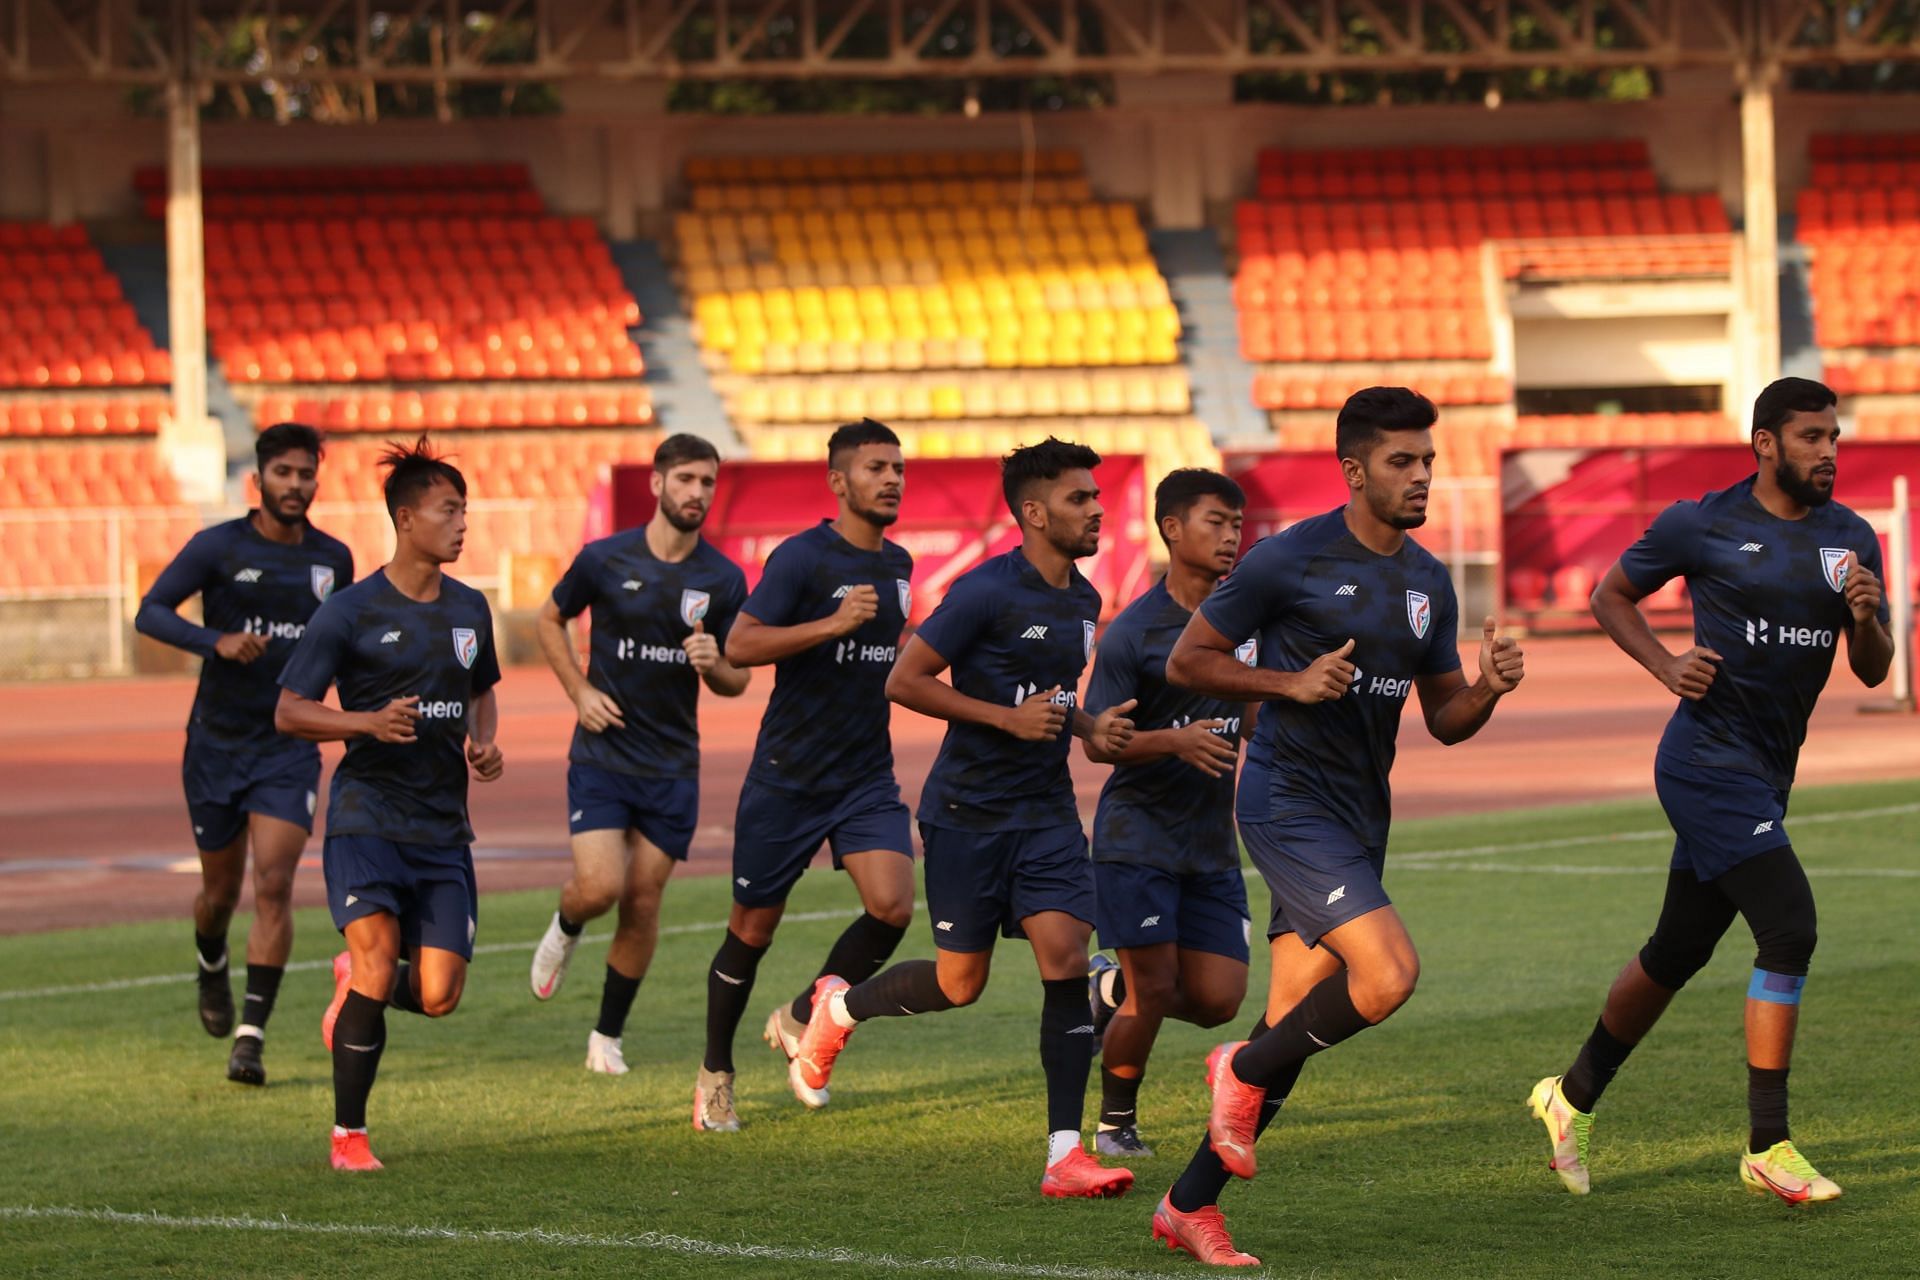 Indian players preparing for the game against Belarus. (Image Courtesy: Twitter/IndianFootball)